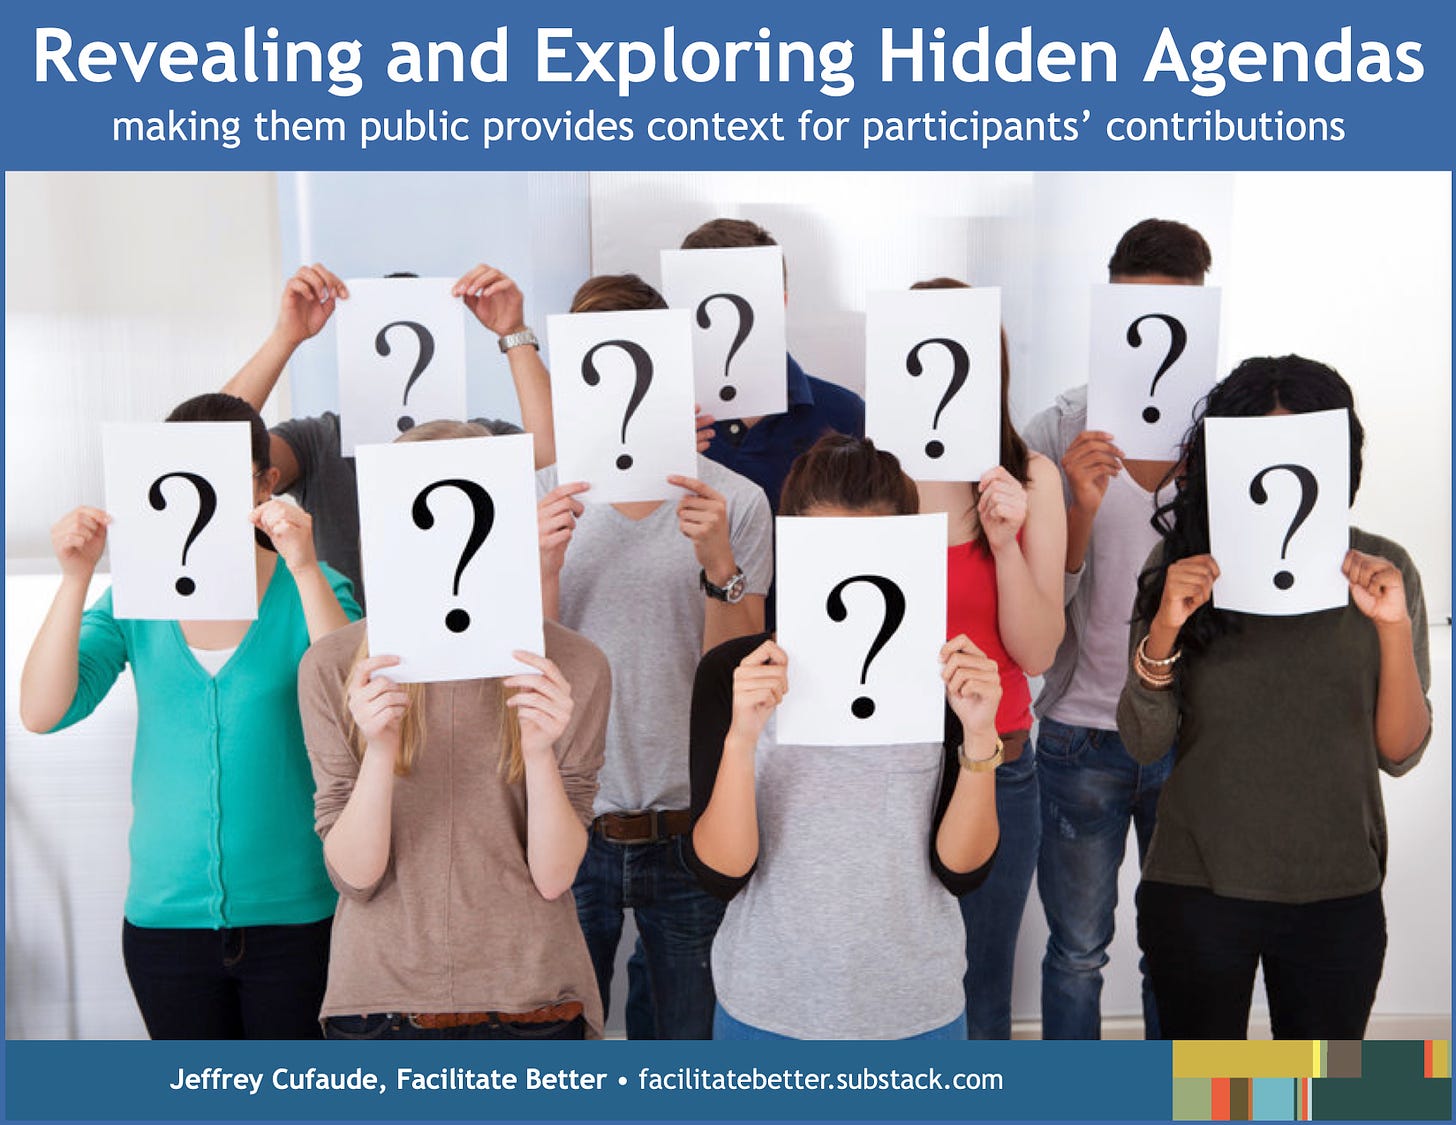 A group of nine young adults dressed casually stand in two rows.  Each holds a white sheet of paper with a large black question mark on it in front of their face.  Text above image: Revealing and Exploring Hidden Agendas making them public provides context for participants’ contributions